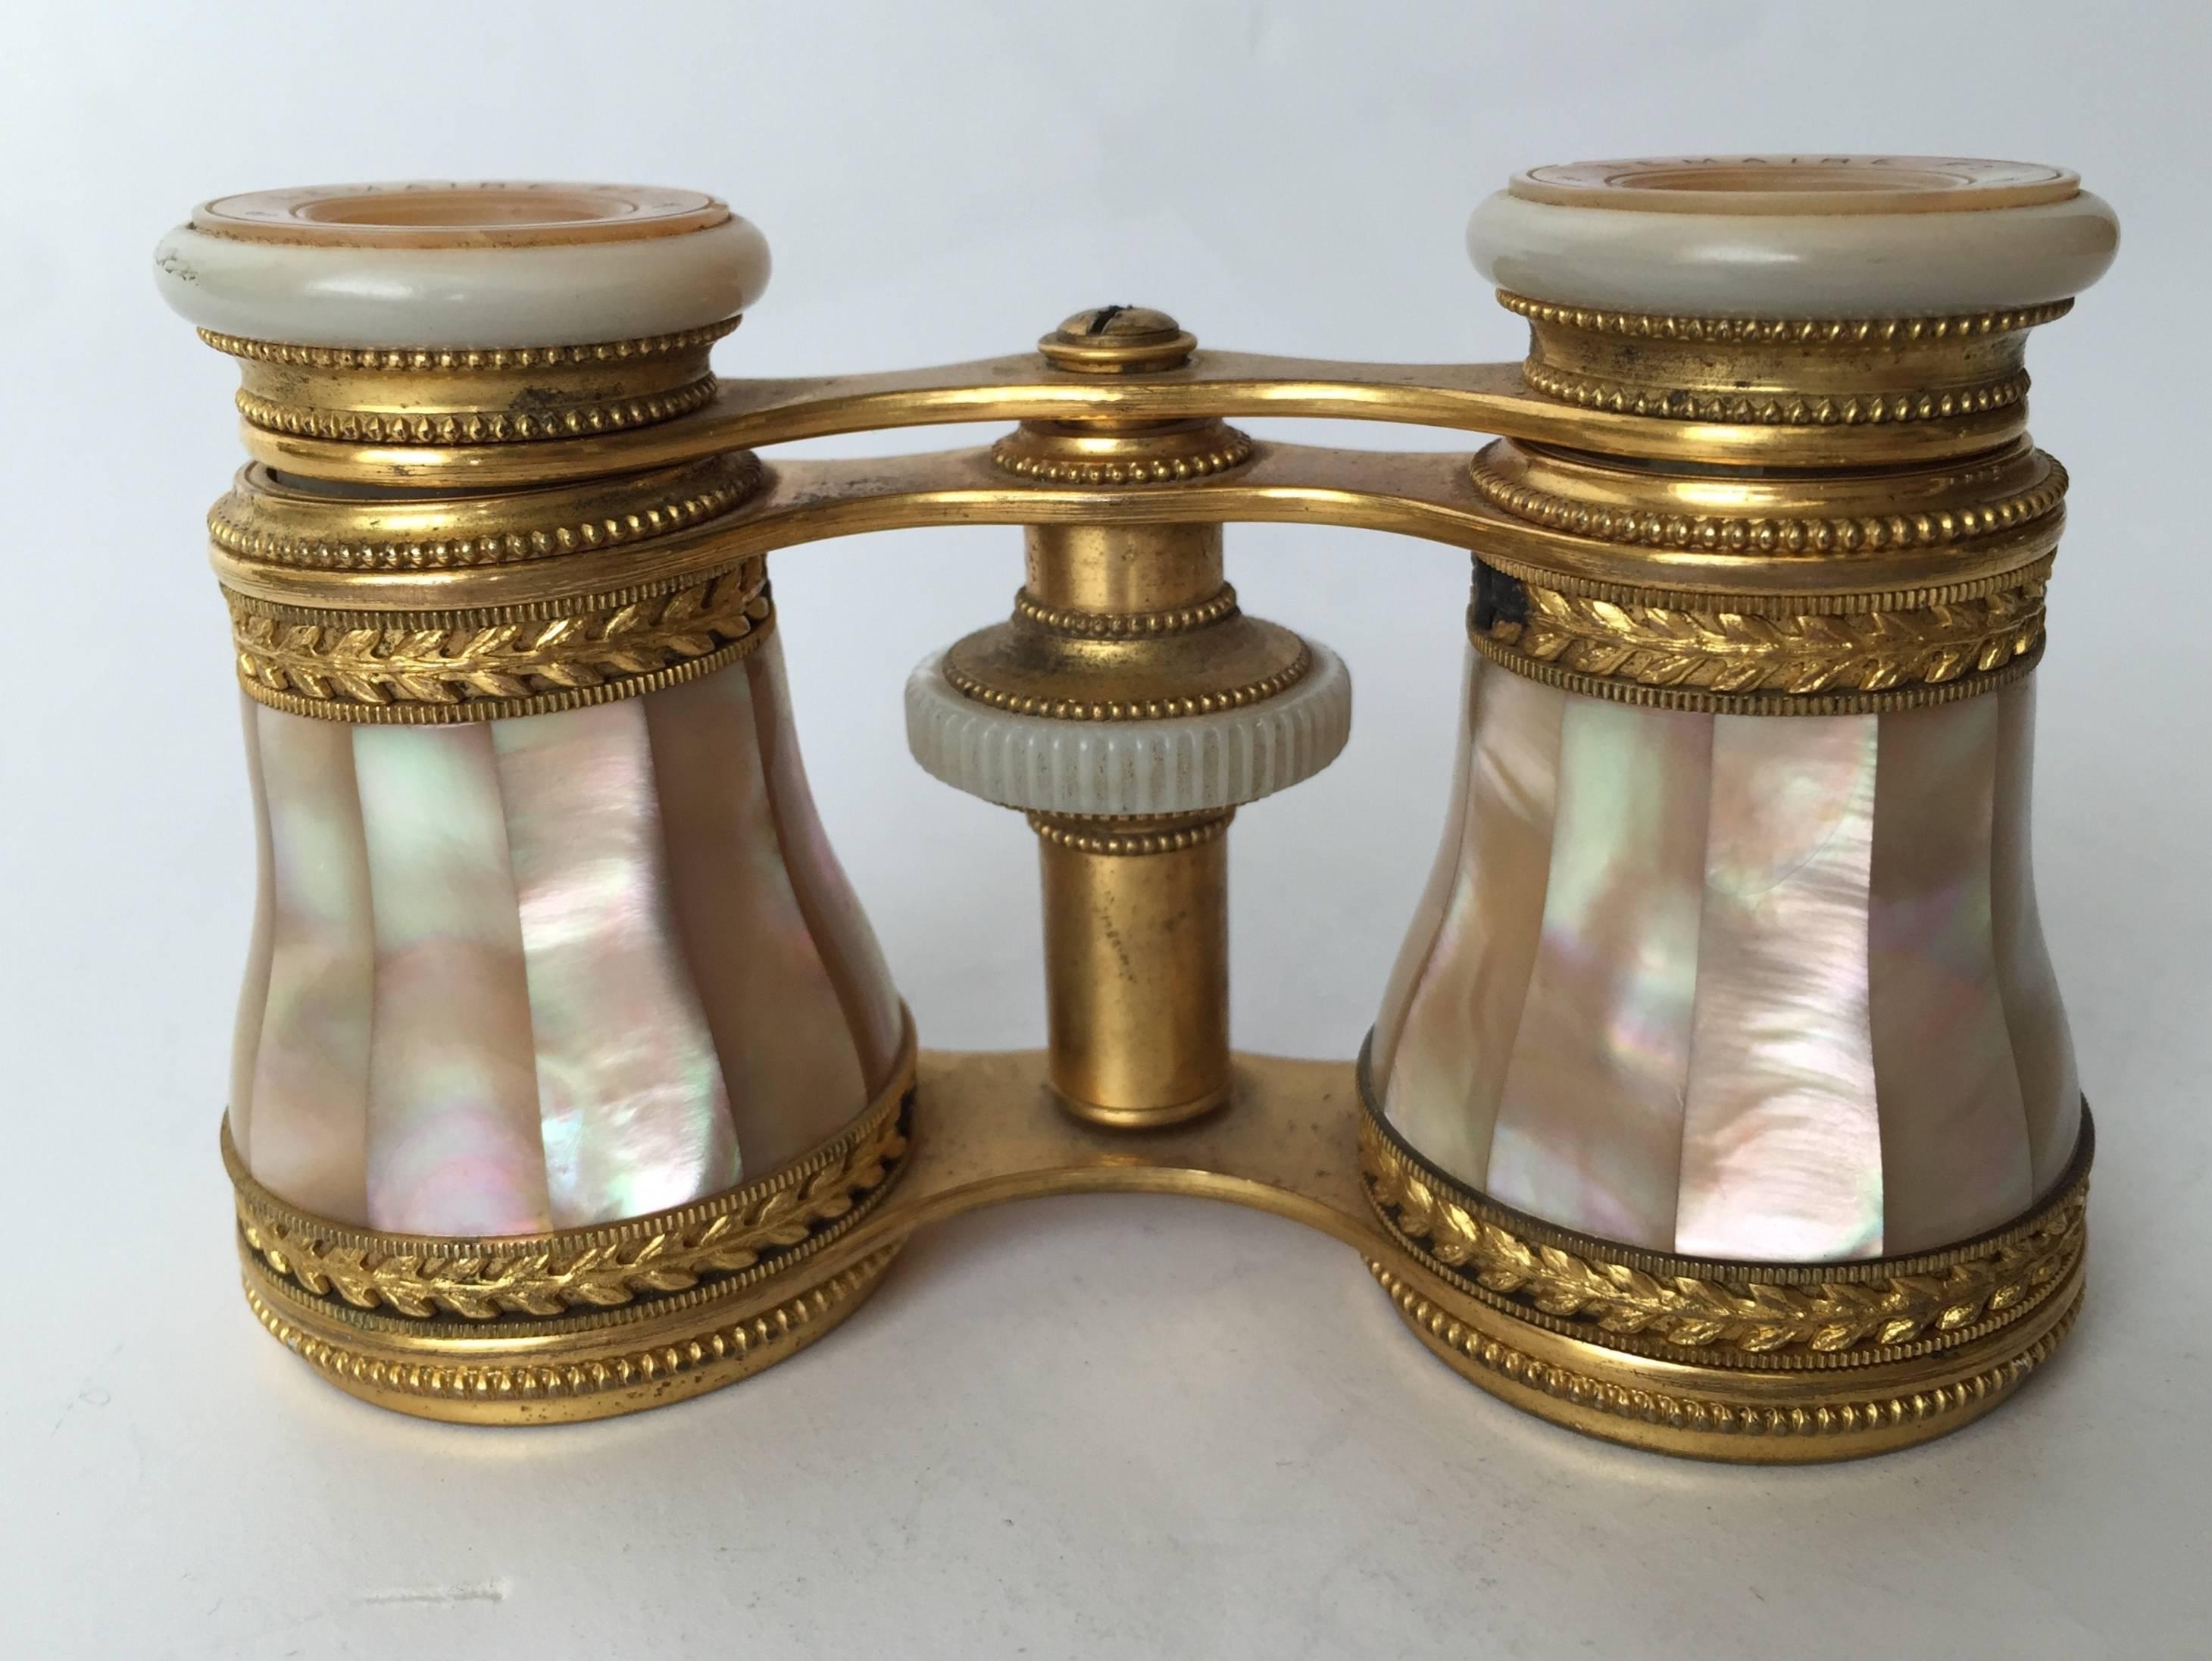 Antique French, Mother-of-Pearl and Gilt Brass Opera Glasses, circa 1900, Paris In Excellent Condition For Sale In Redding, CA